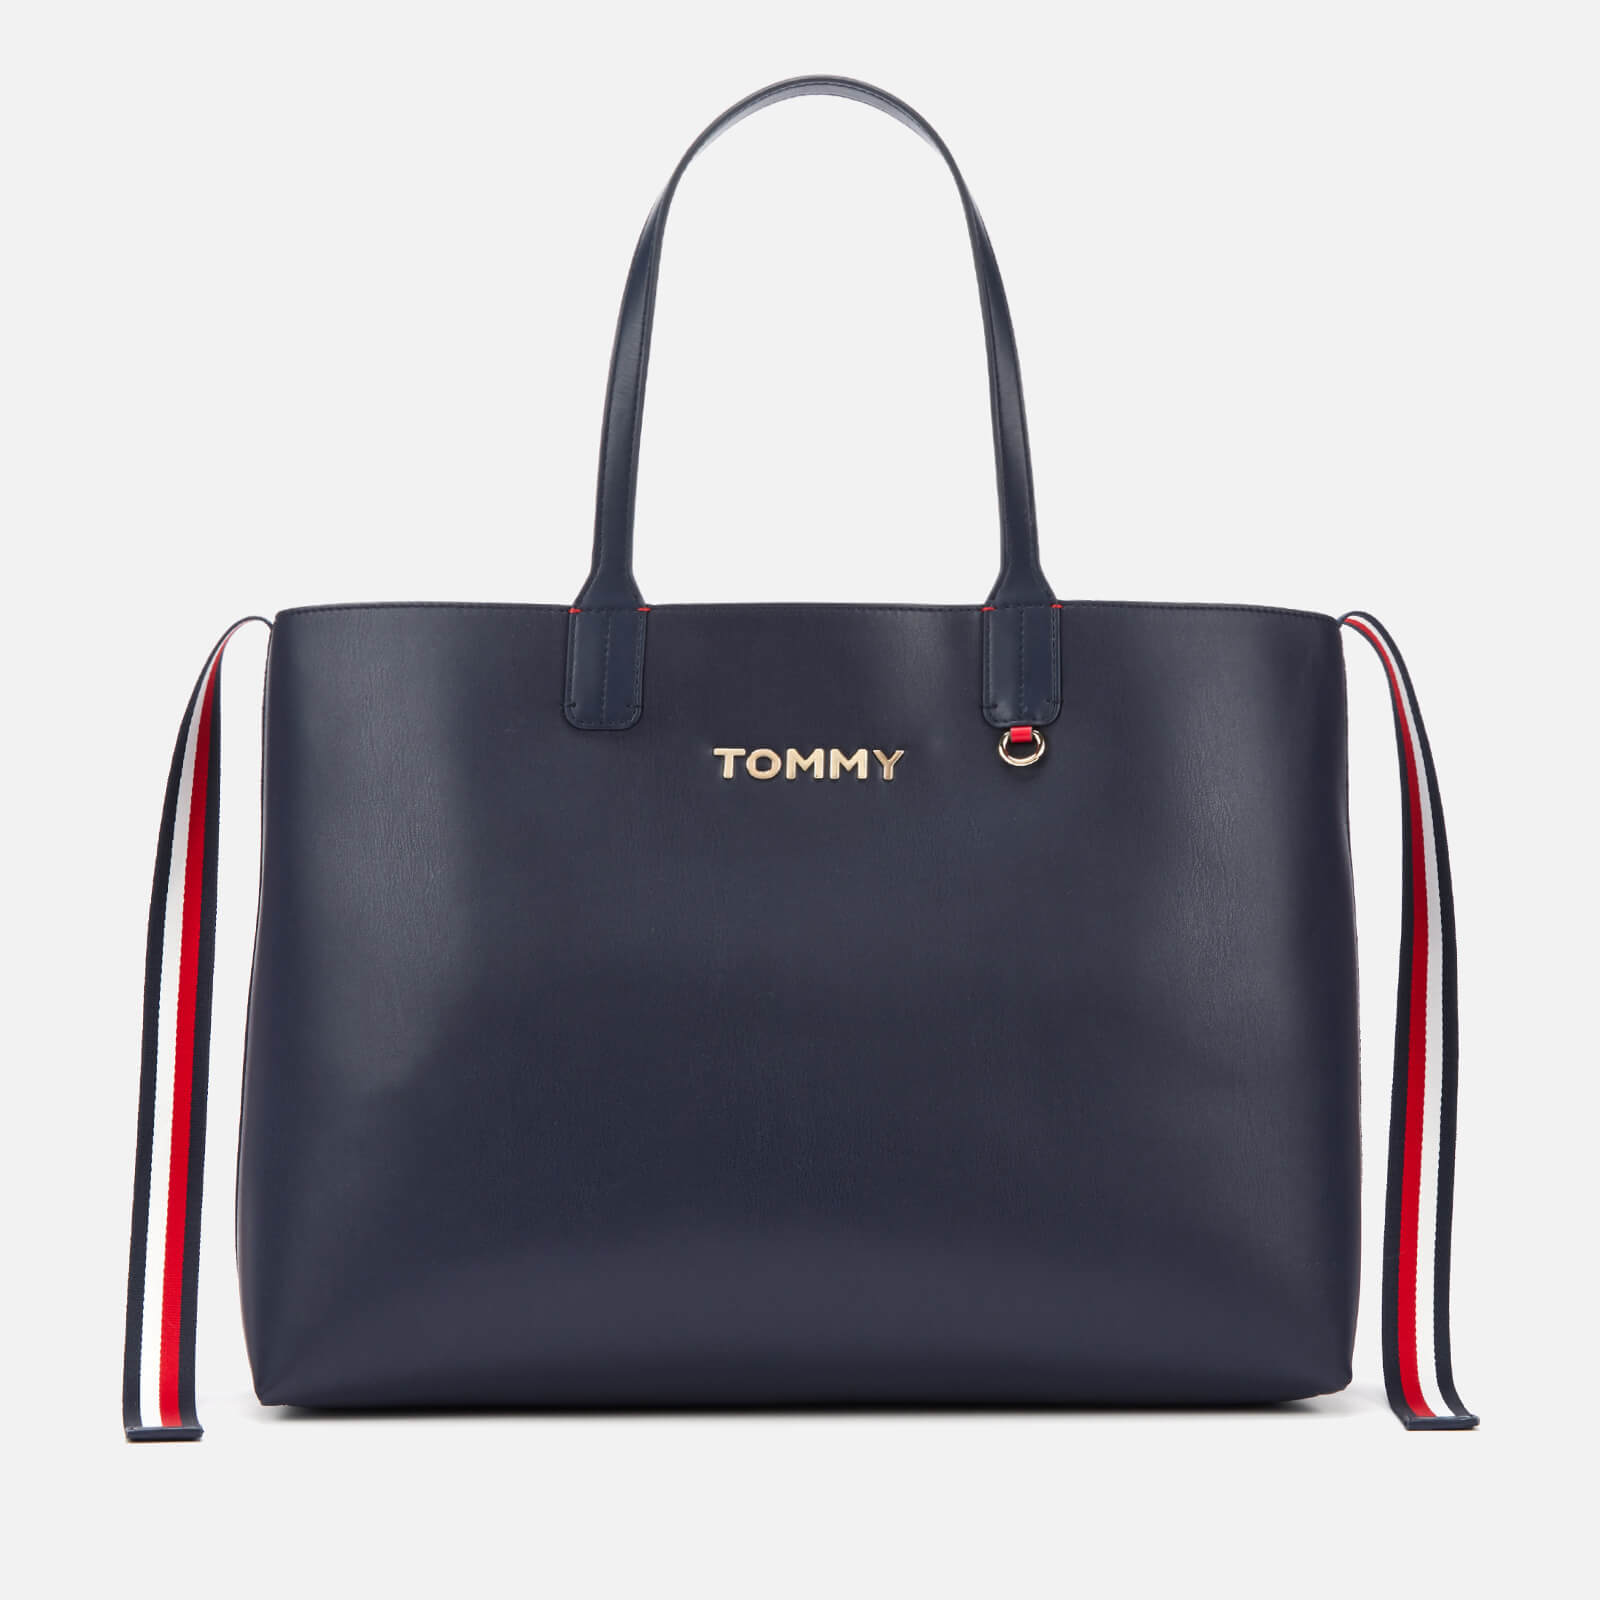 Tommy Hilfiger Women's Iconic Tommy 